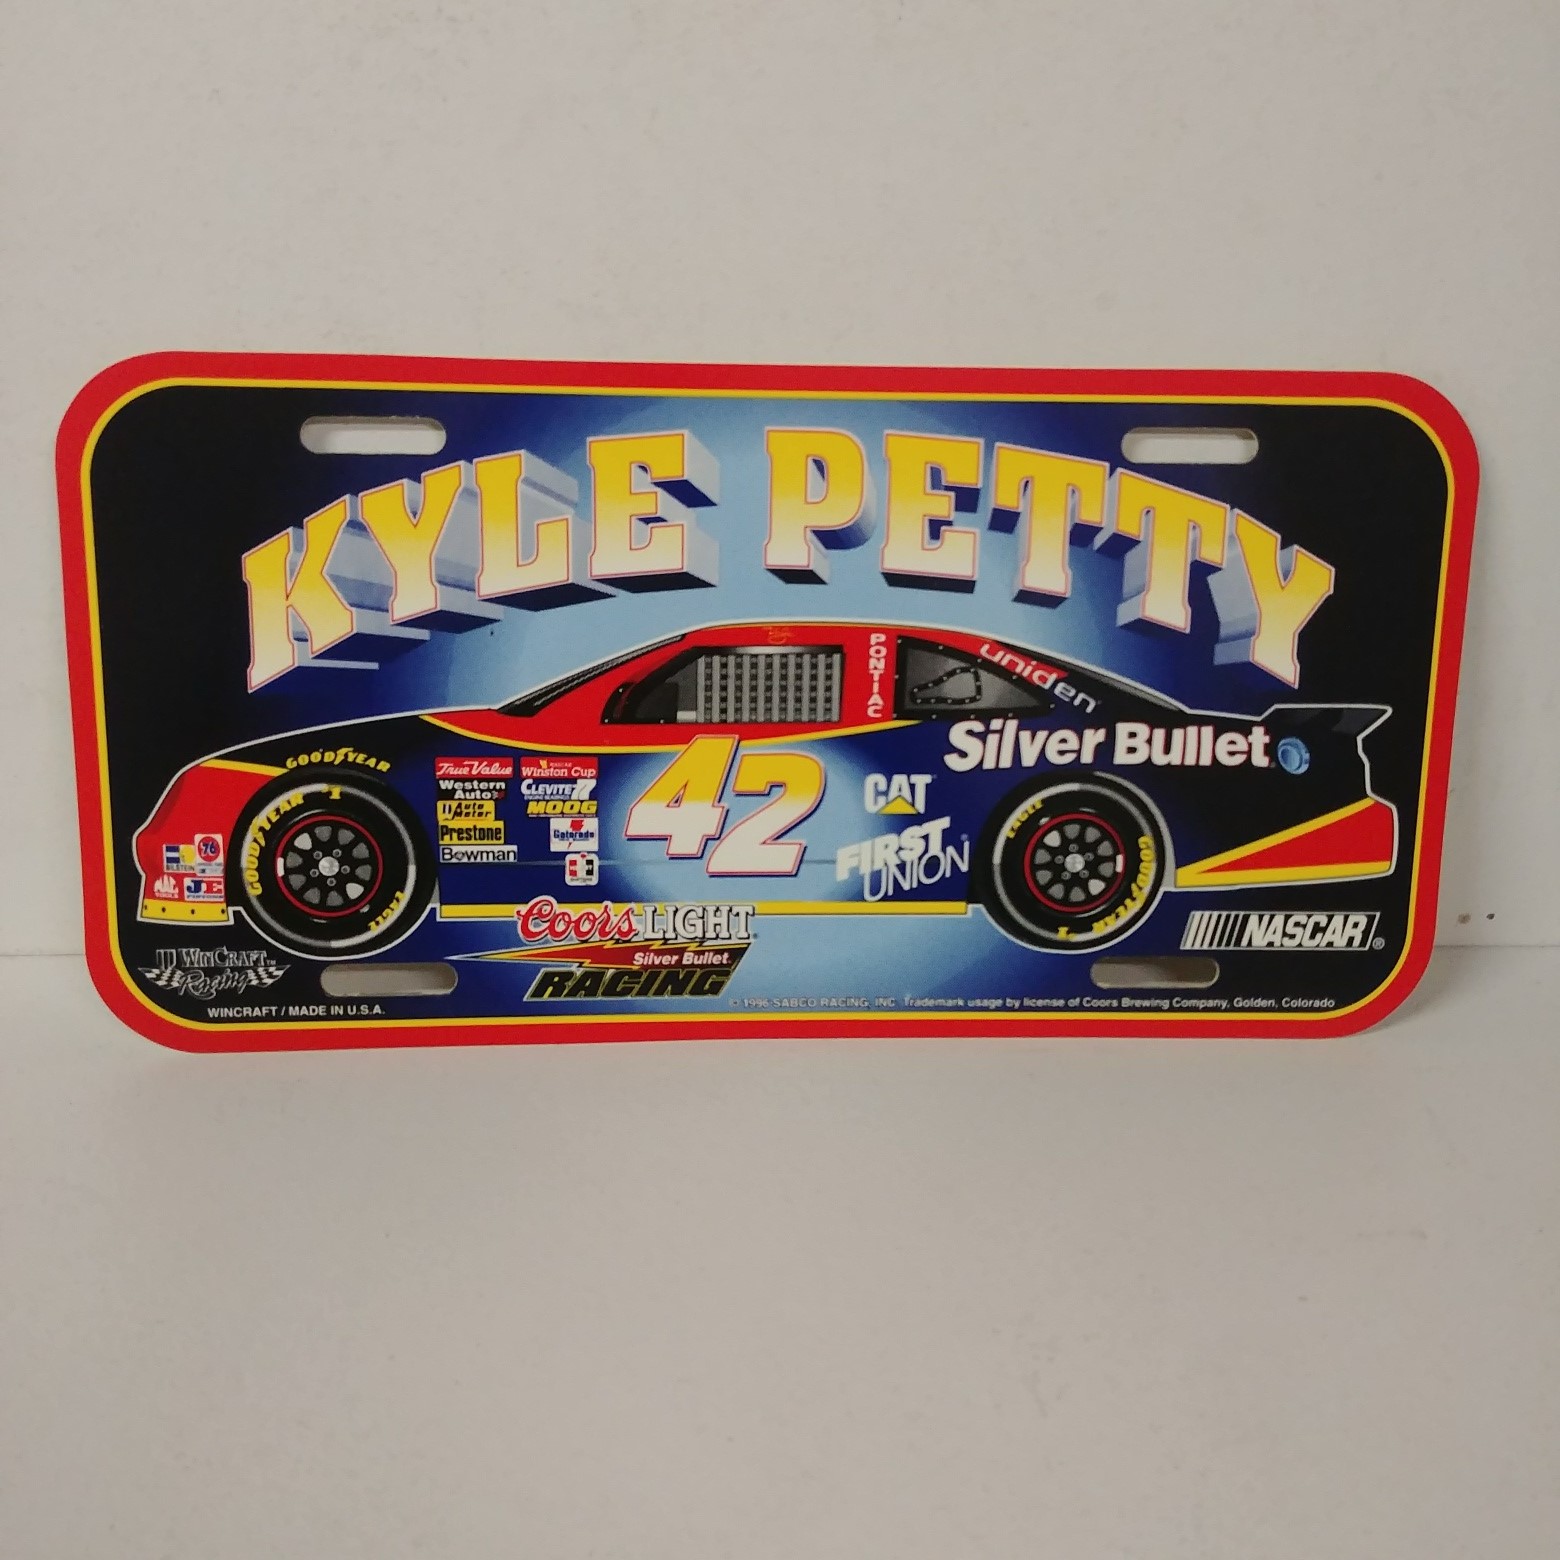 1996 Kyle Petty Silver Bullet plastic license plate